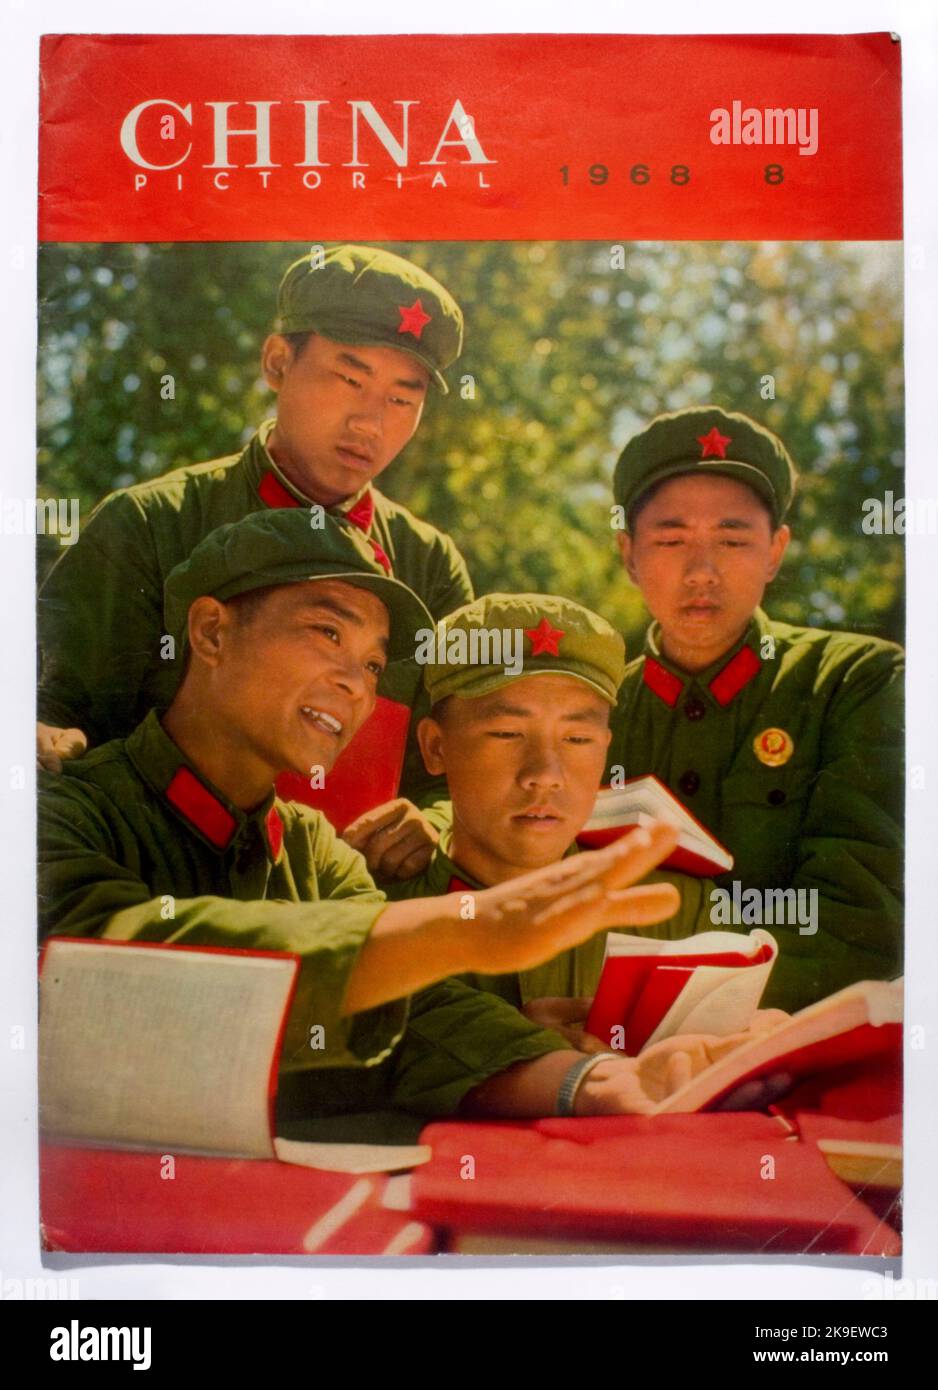 China Pictorial 1968 Stock Photo